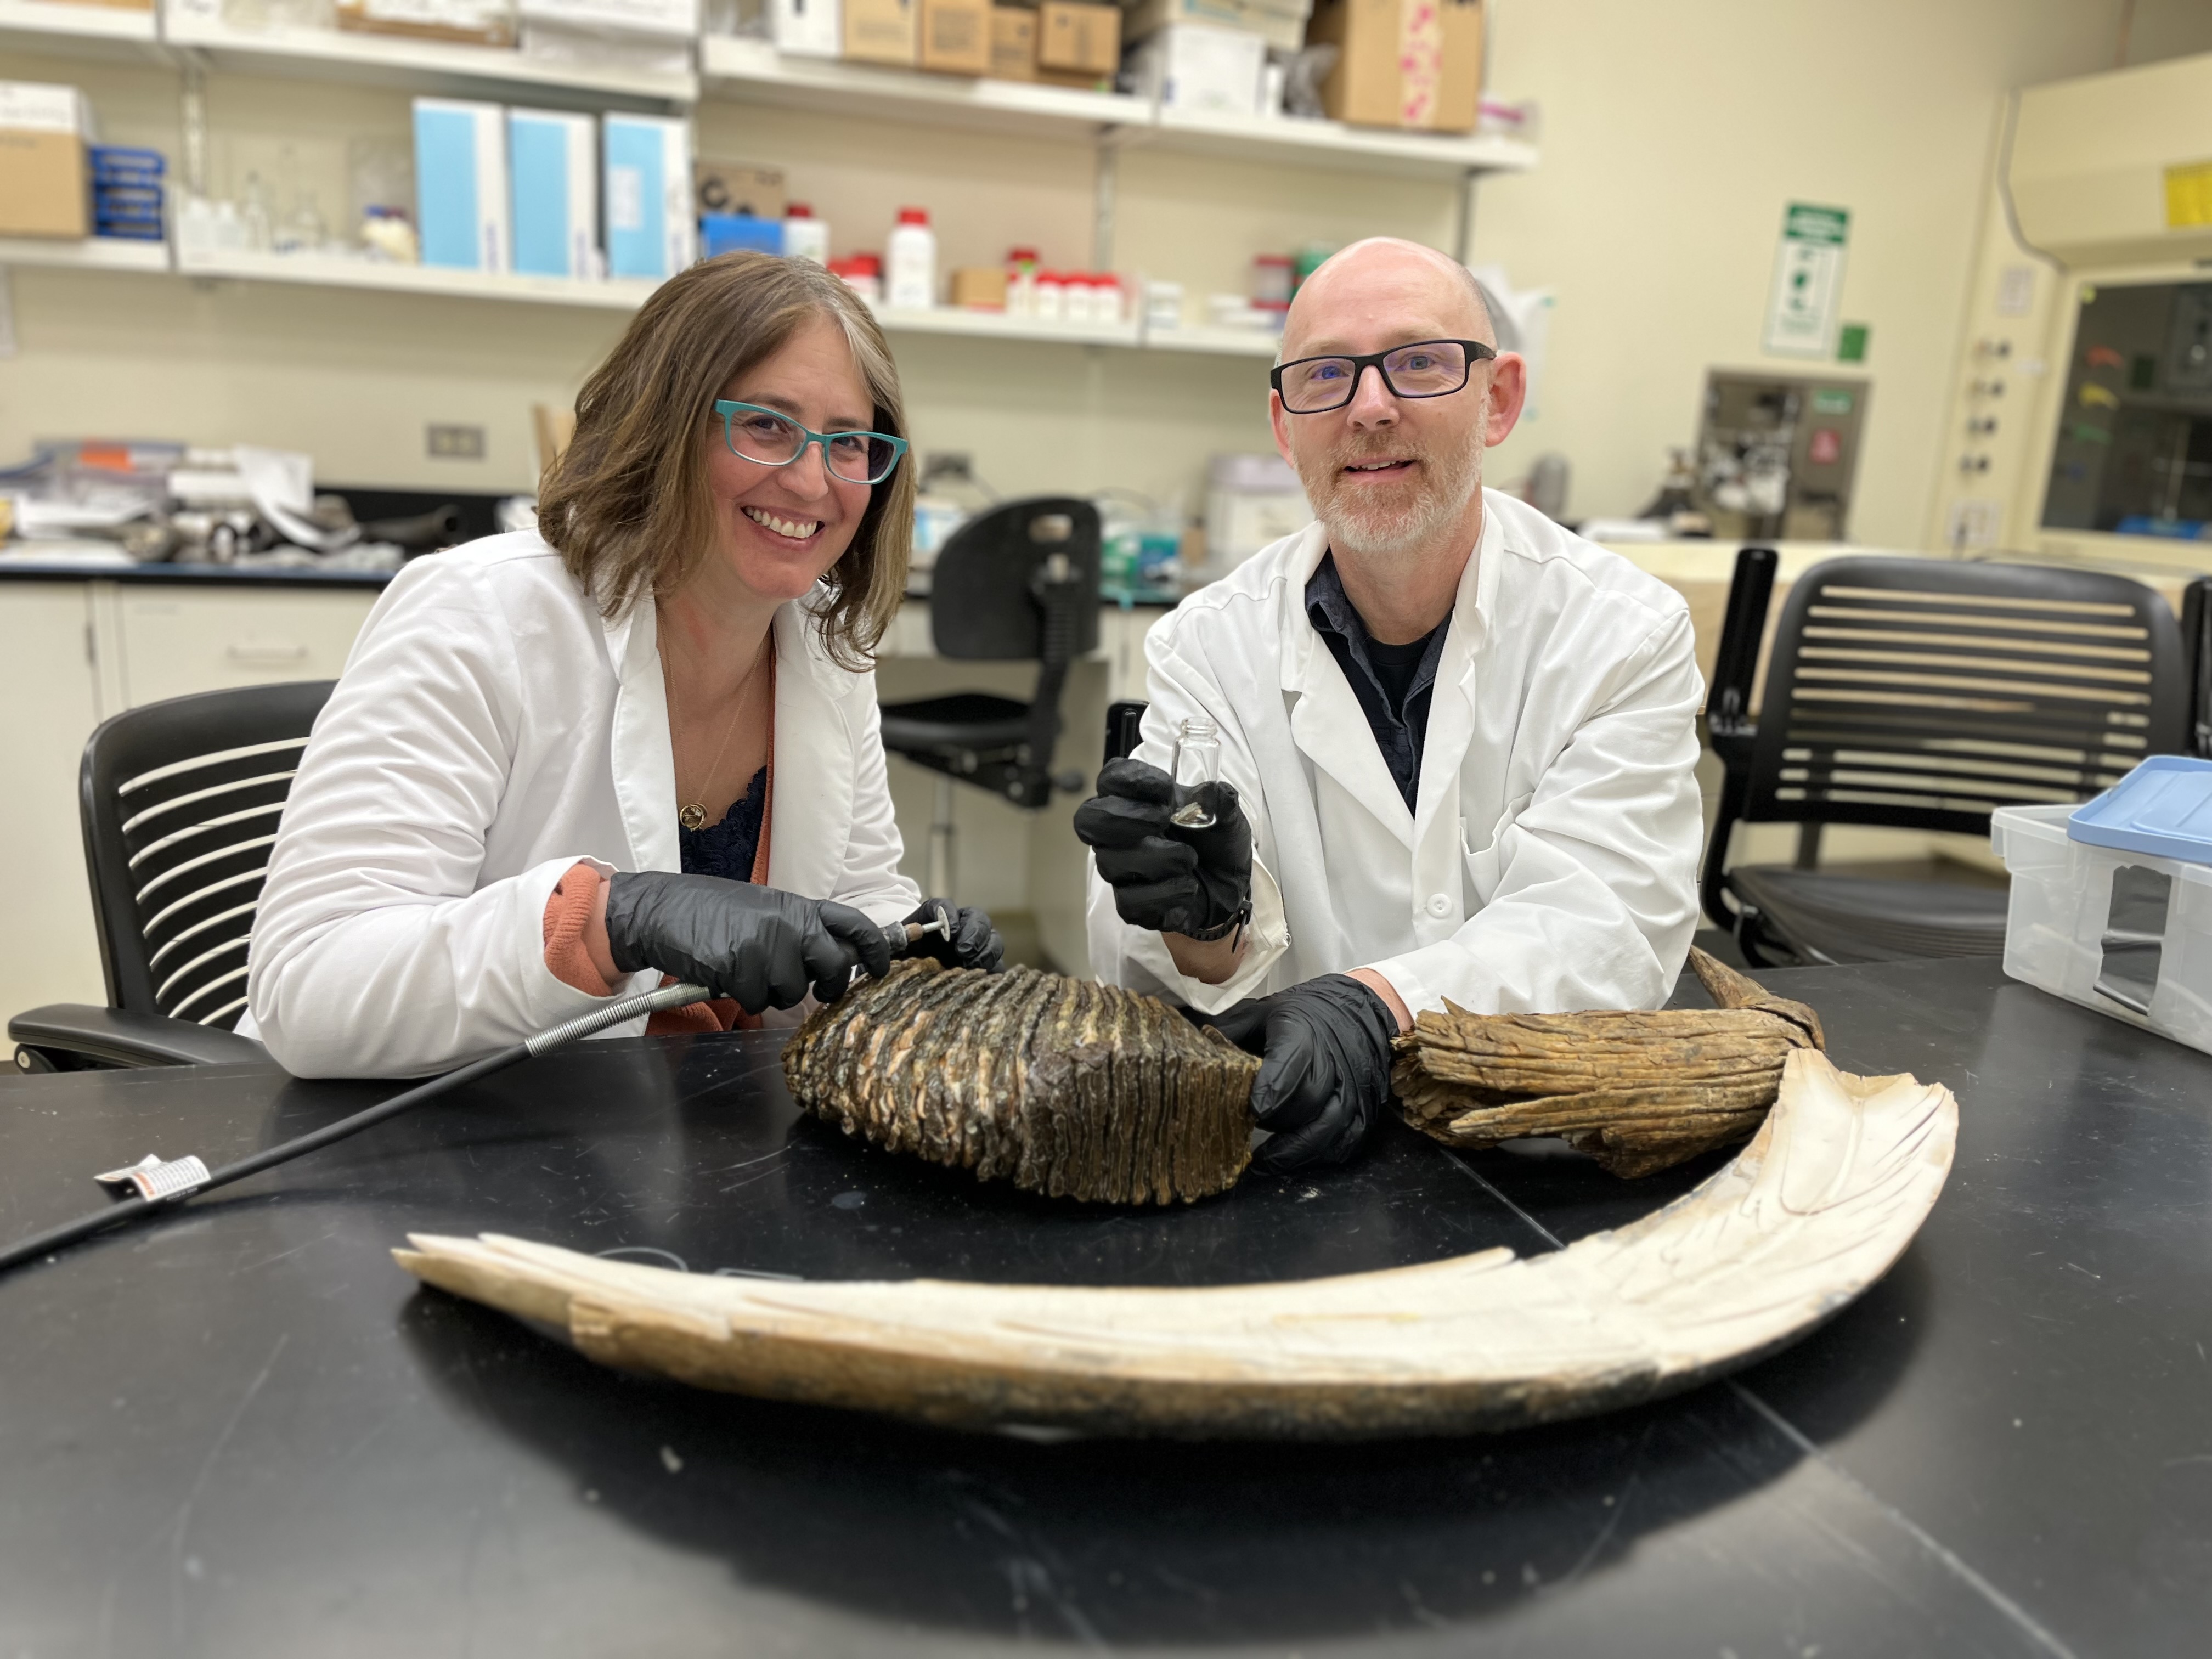 A large fossilized tooth sits on a laboratory table in front of a man and woman wearing white lab coats and black rubber gloves. The woman holds a drill and the man holds a specimen bottle.